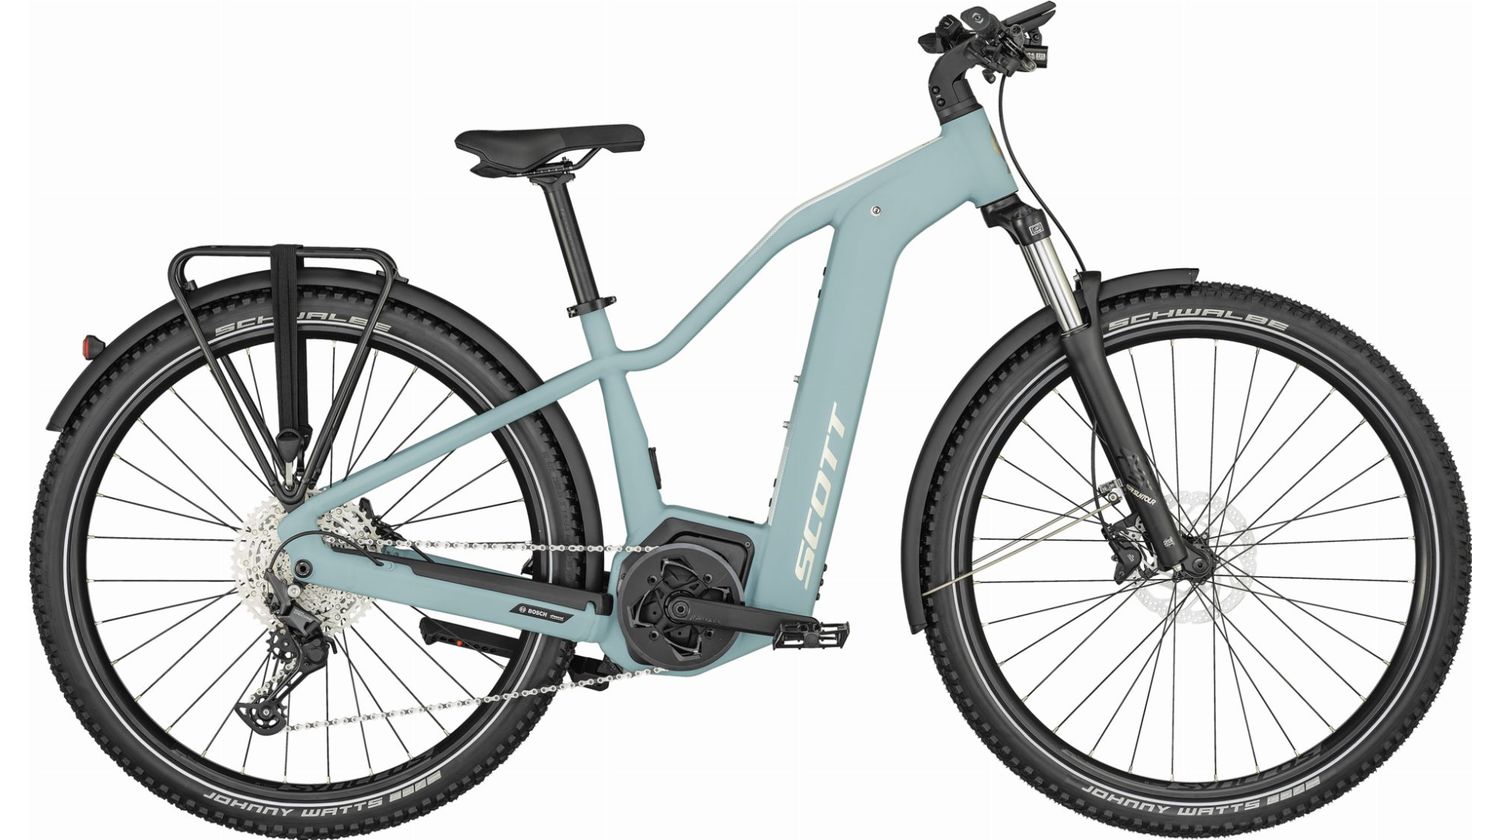 Scott Axis eRIDE 30 Lady 500 Wh E-Bike Hardtail Diamant 29 Muted Blue